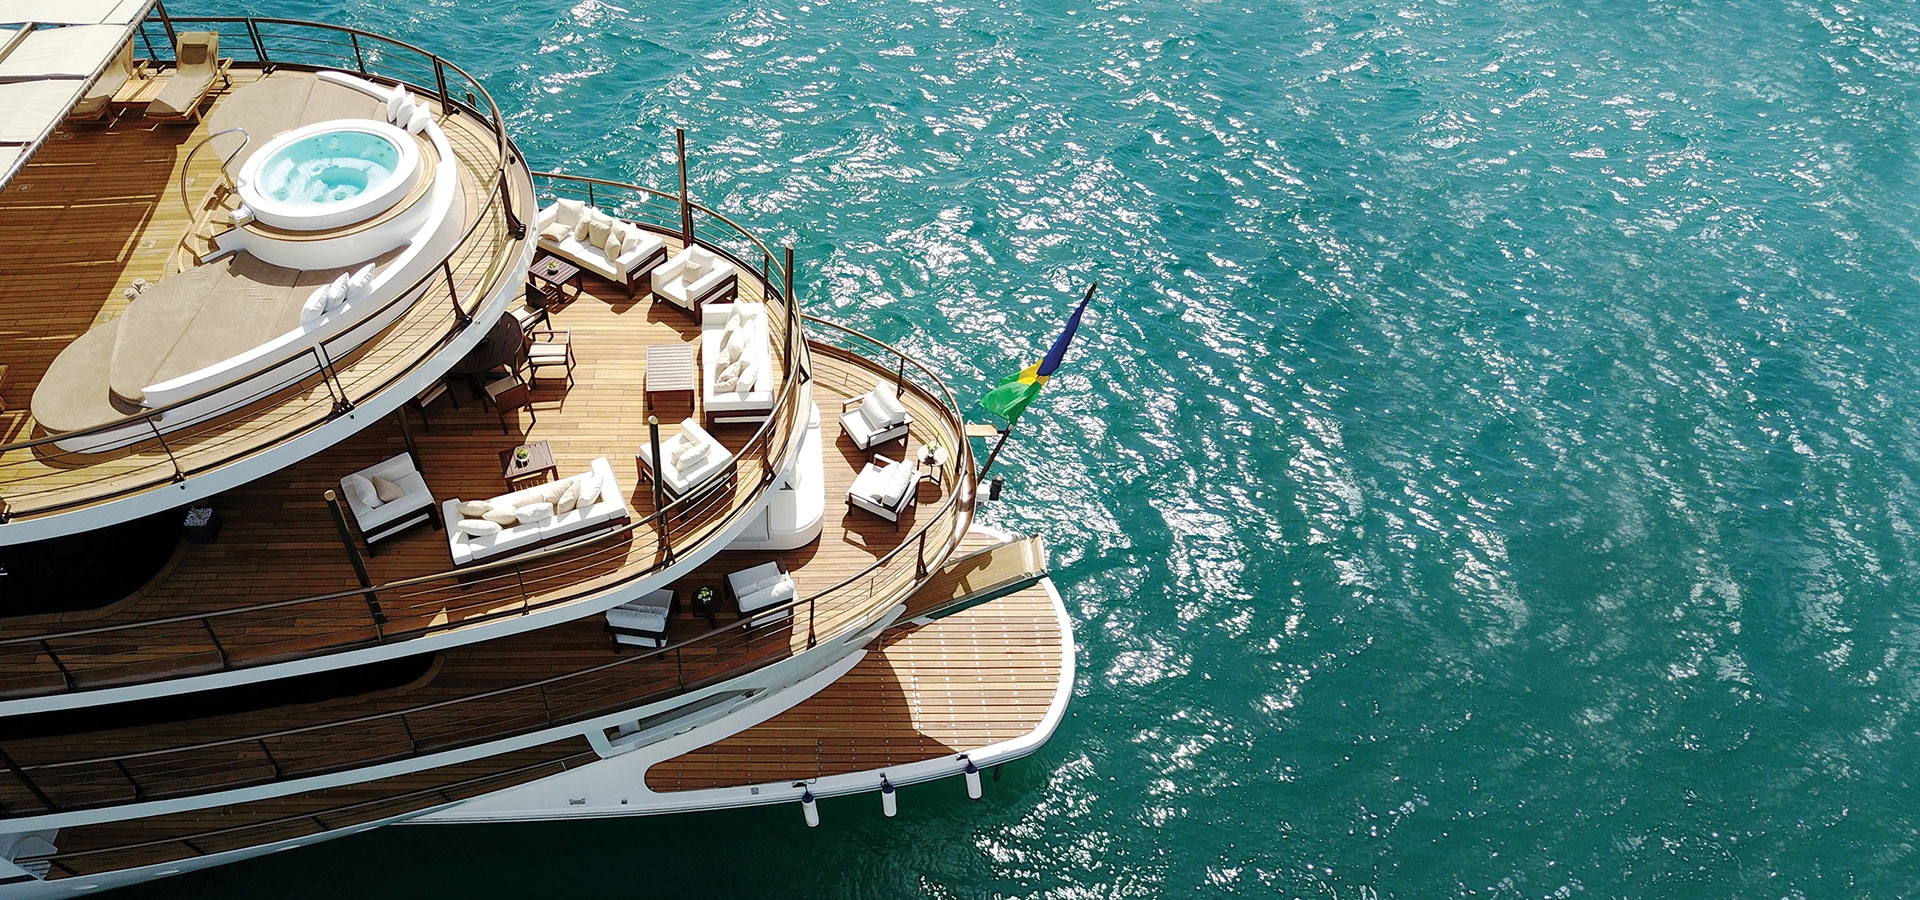 Leaders in the world of yachting